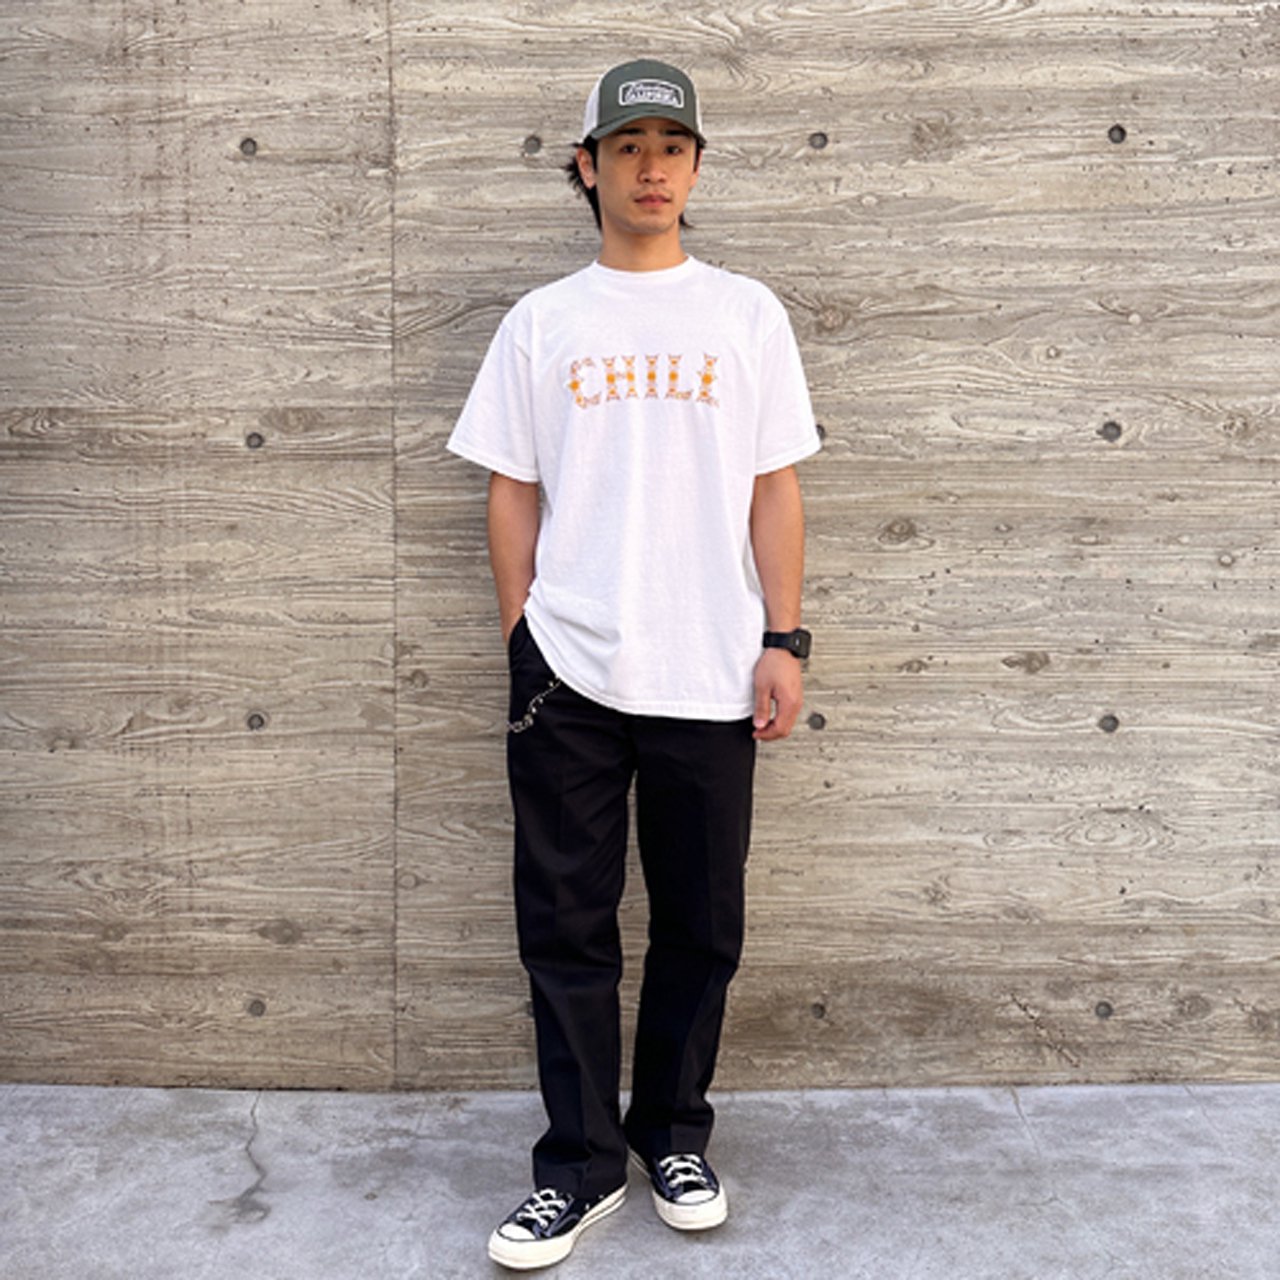 <img class='new_mark_img1' src='https://img.shop-pro.jp/img/new/icons5.gif' style='border:none;display:inline;margin:0px;padding:0px;width:auto;' />STANDARD CALIFORNIA ( ե˥)AHSD Chill Tee White